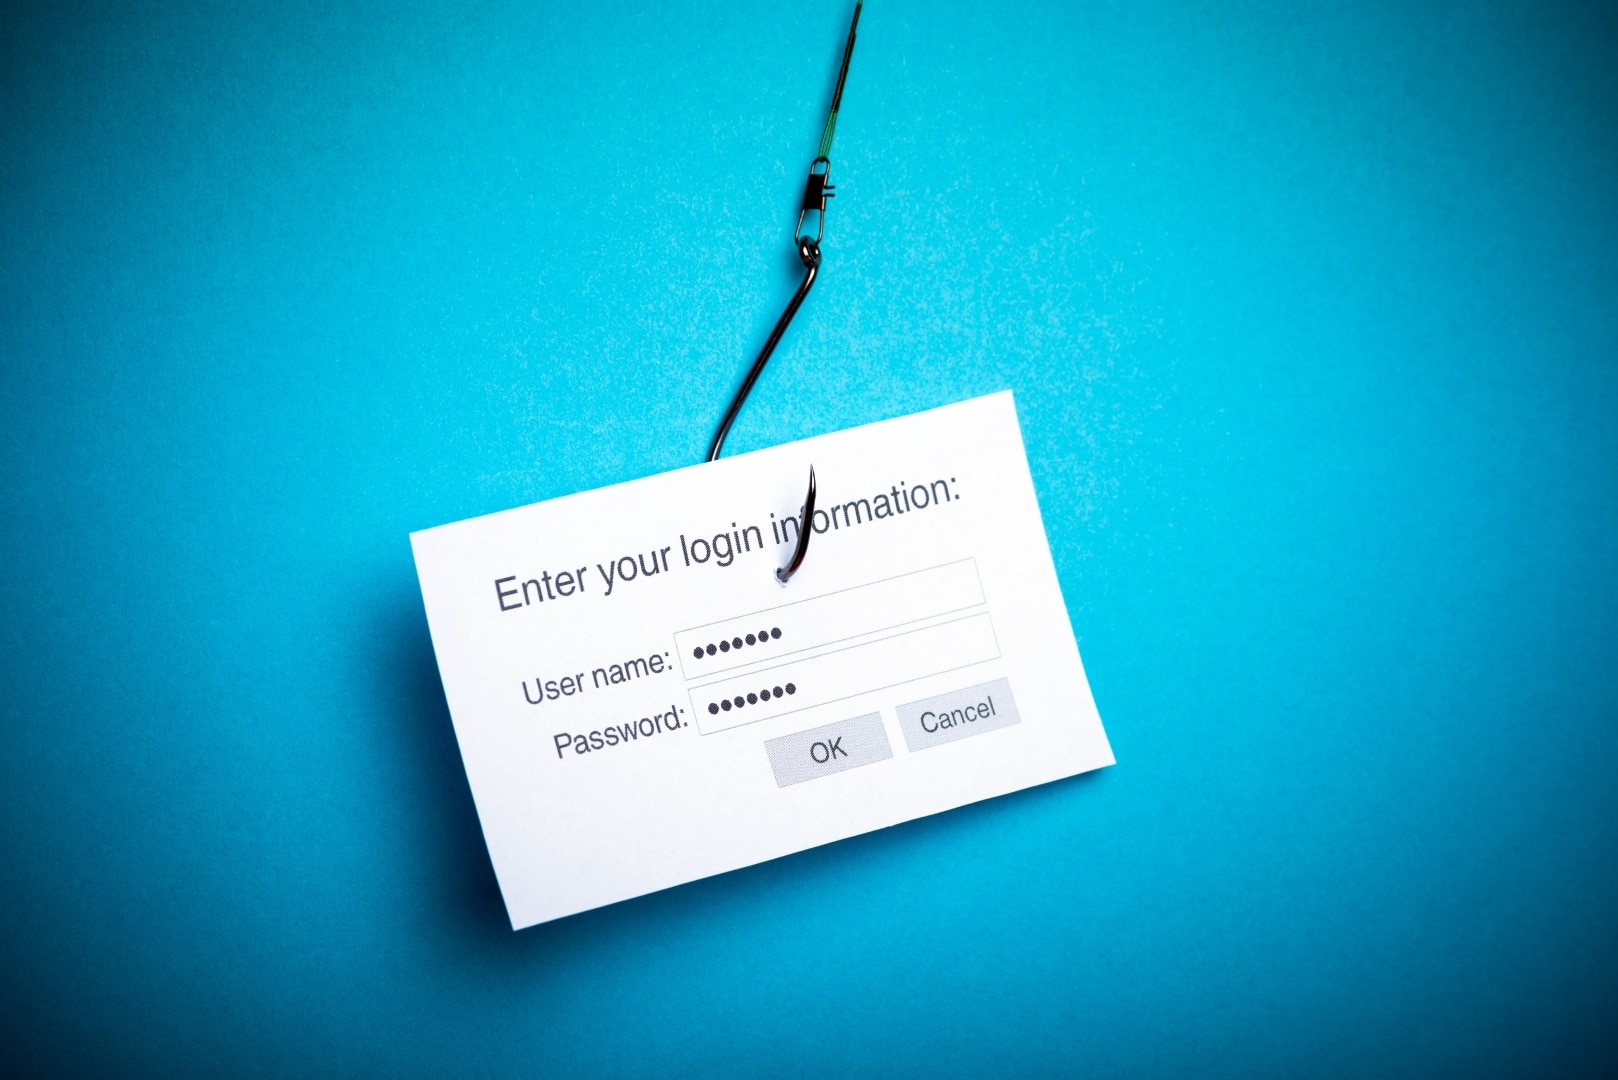 Check Point says 90% of phishing attacks come via email